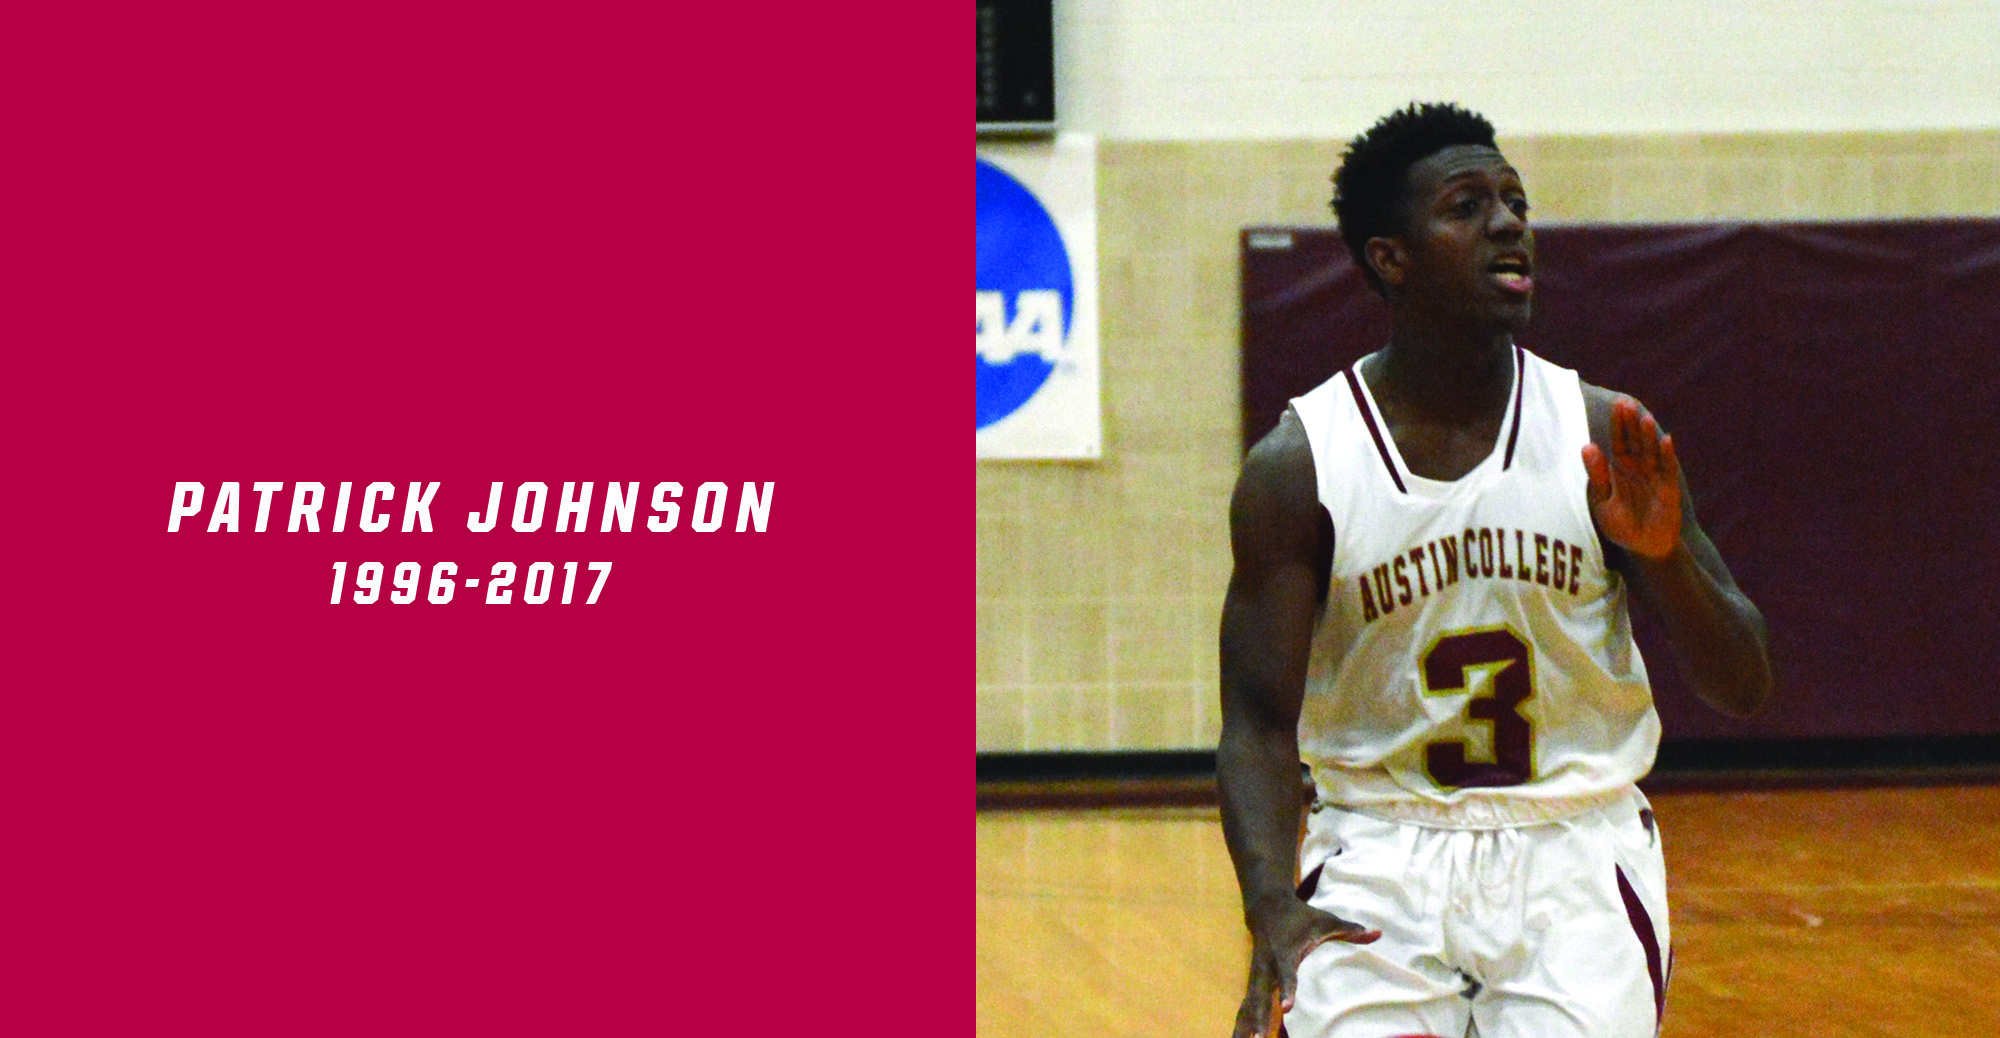 Austin College Mourns the Loss of Patrick Johnson